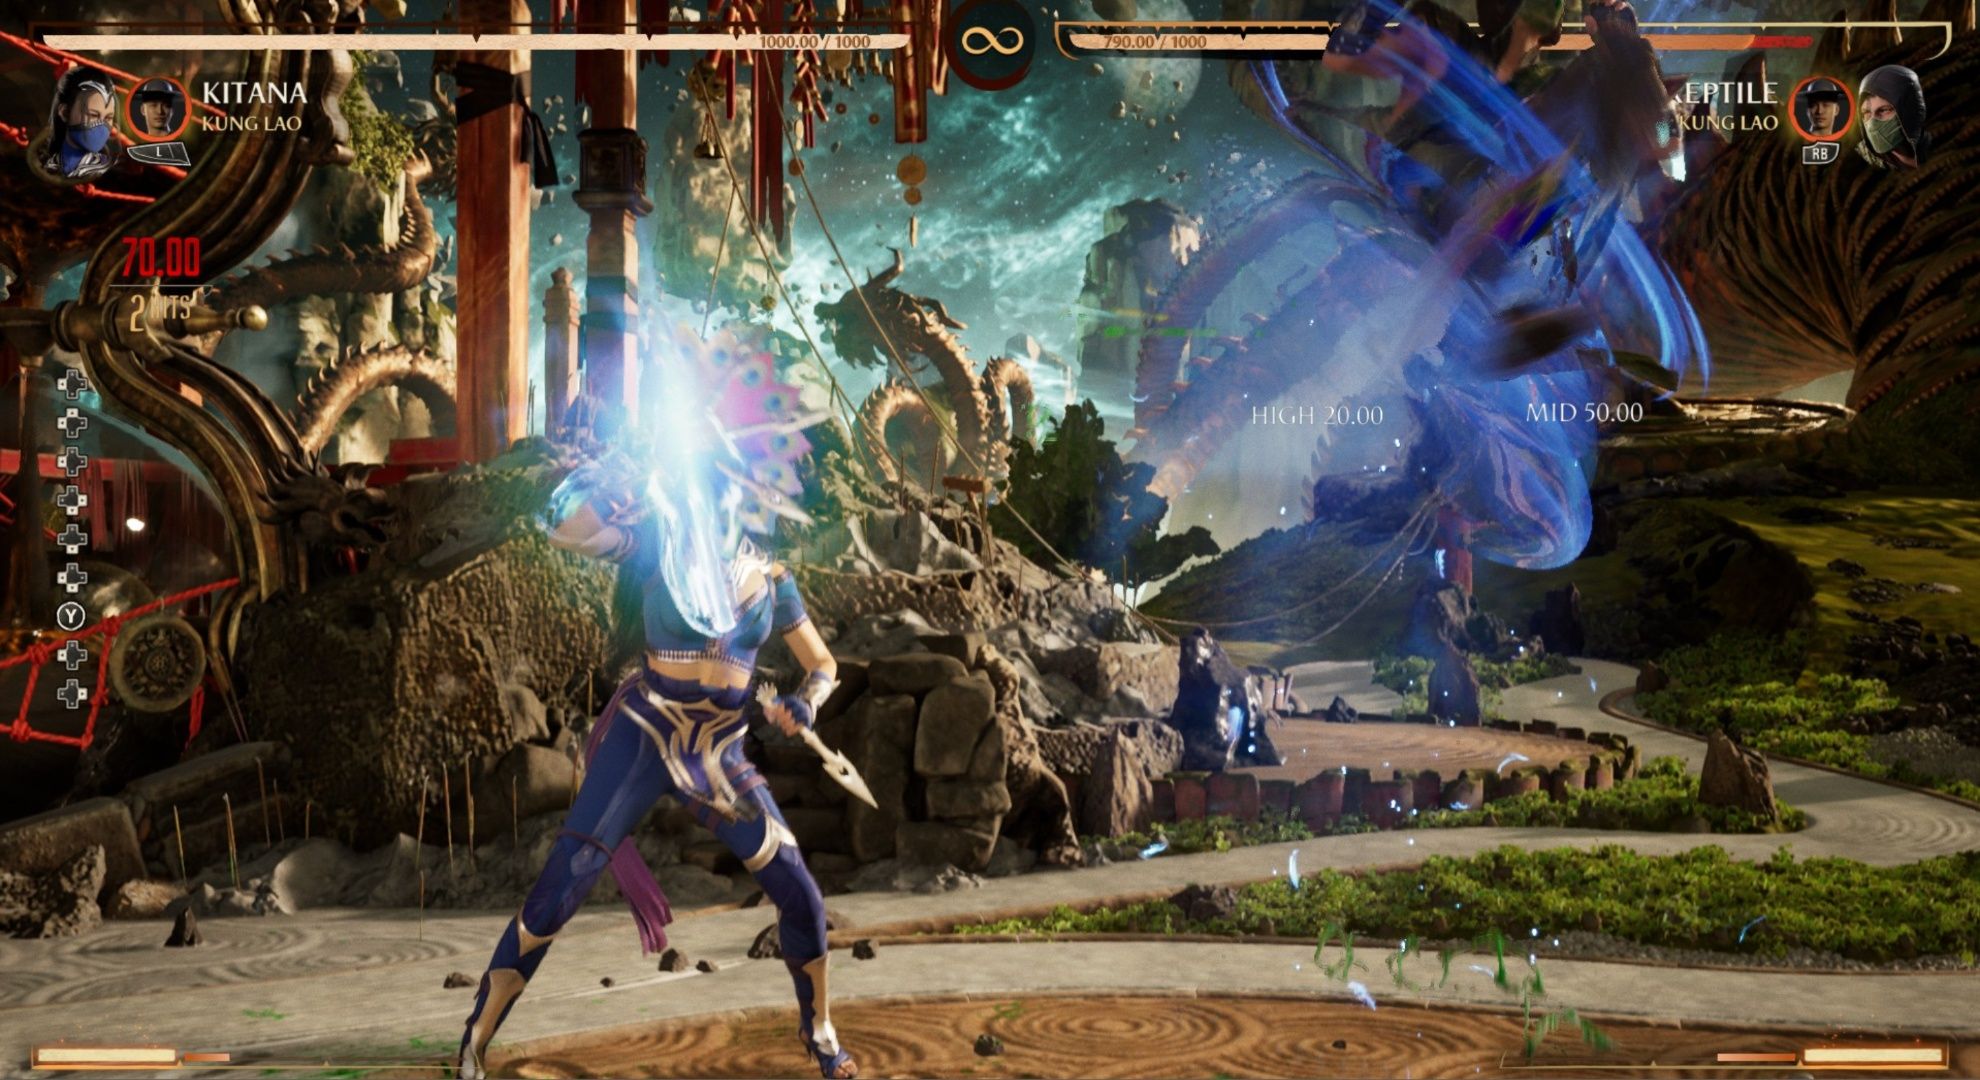 Kitana launches Reptile into the sky using wind and her fans in Mortal Kombat 1.